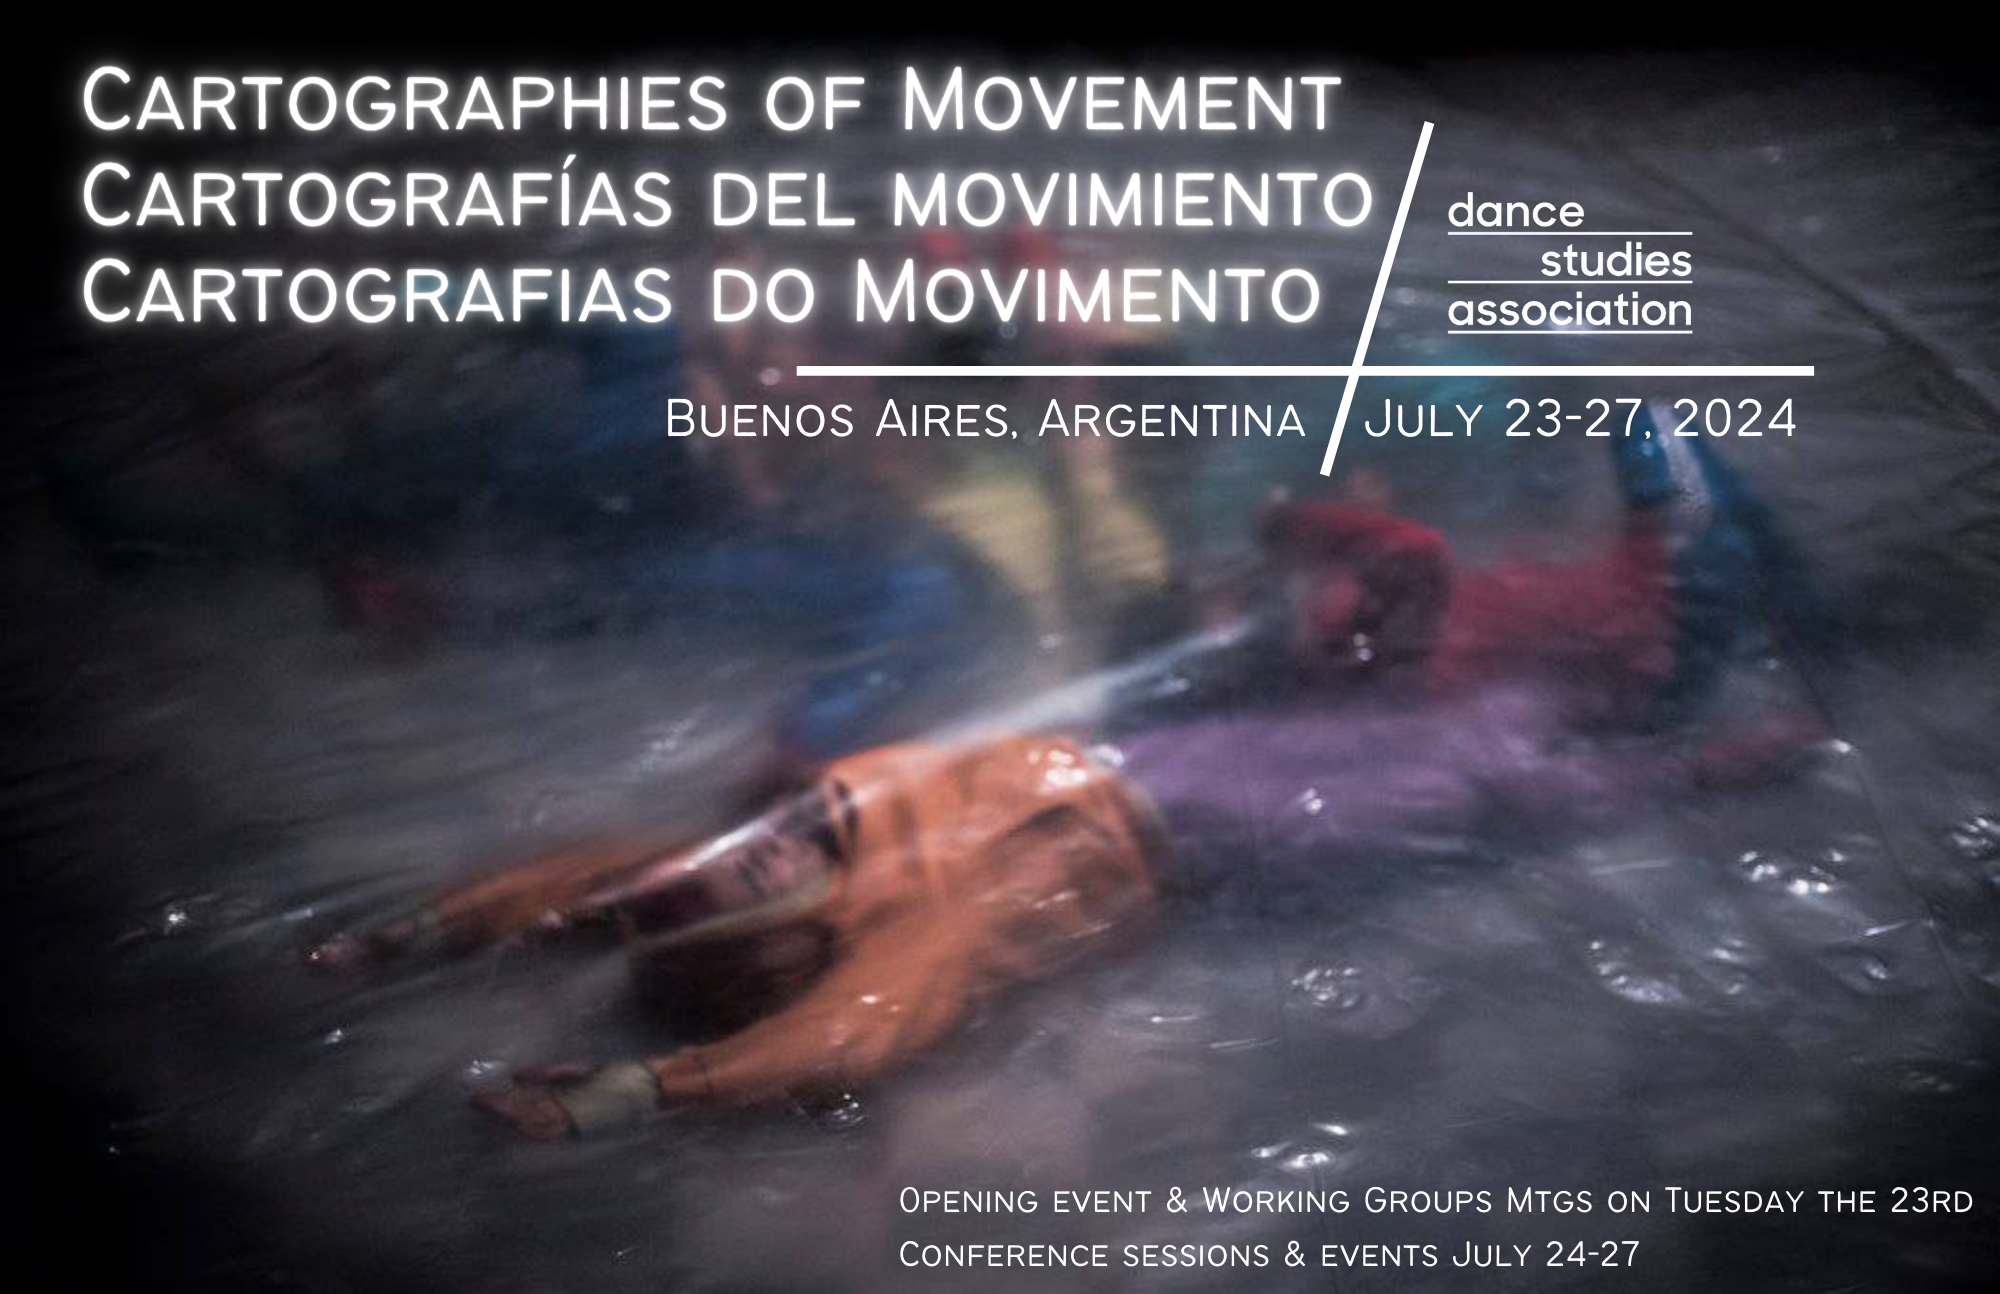 Cartographies of Movement Image